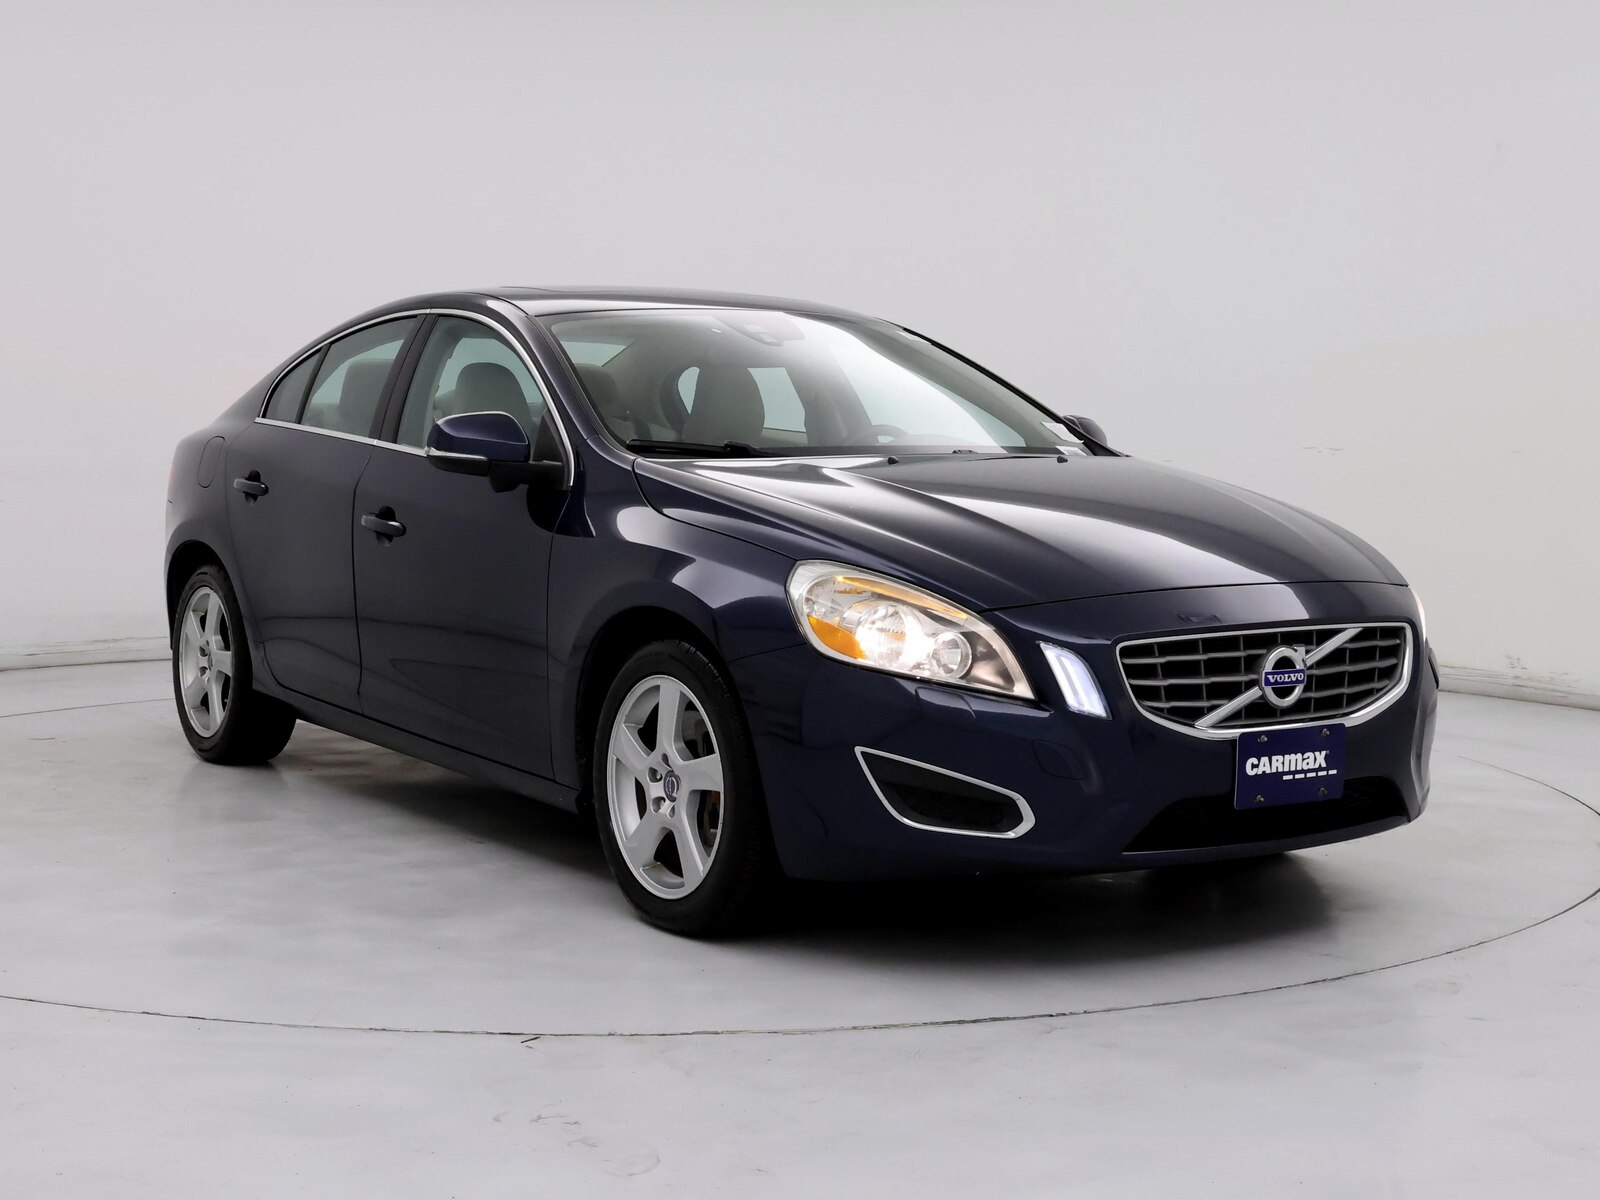 Used 2013 Volvo S60 T5 with VIN YV1612FH0D1216361 for sale in Spokane Valley, WA